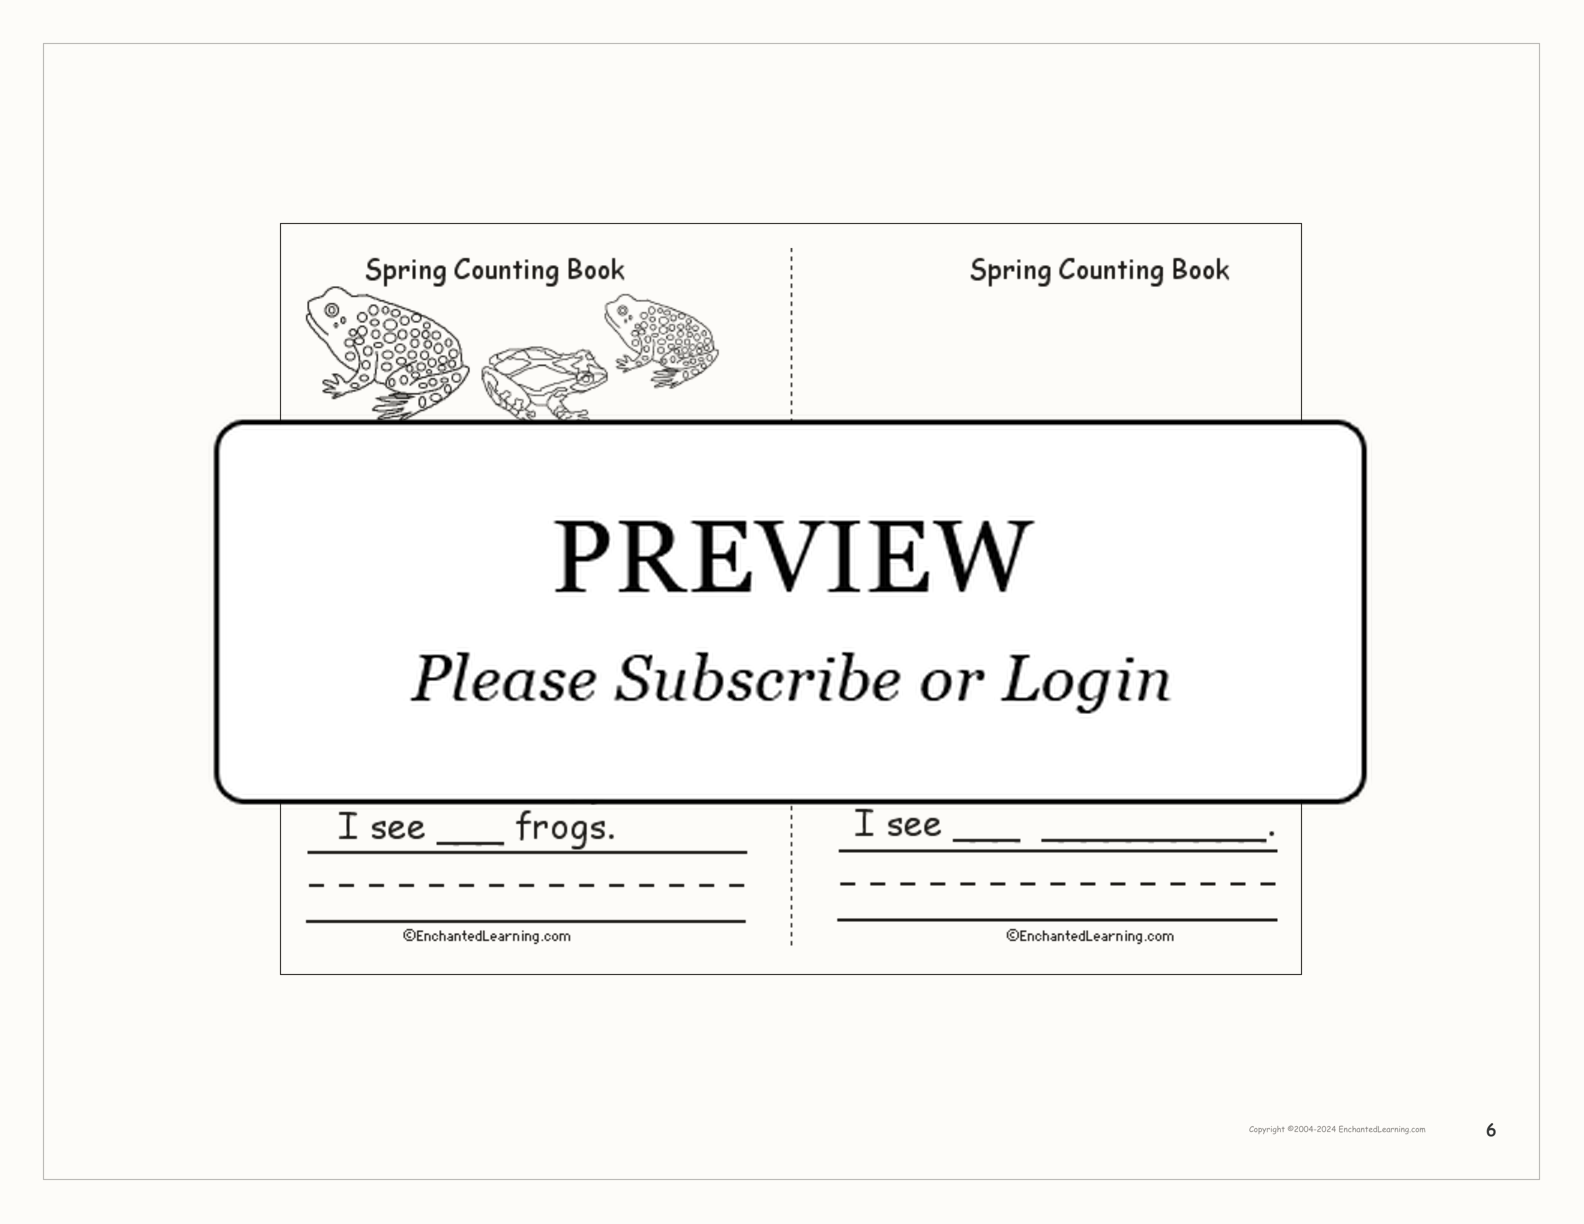 Spring Counting Book interactive worksheet page 6